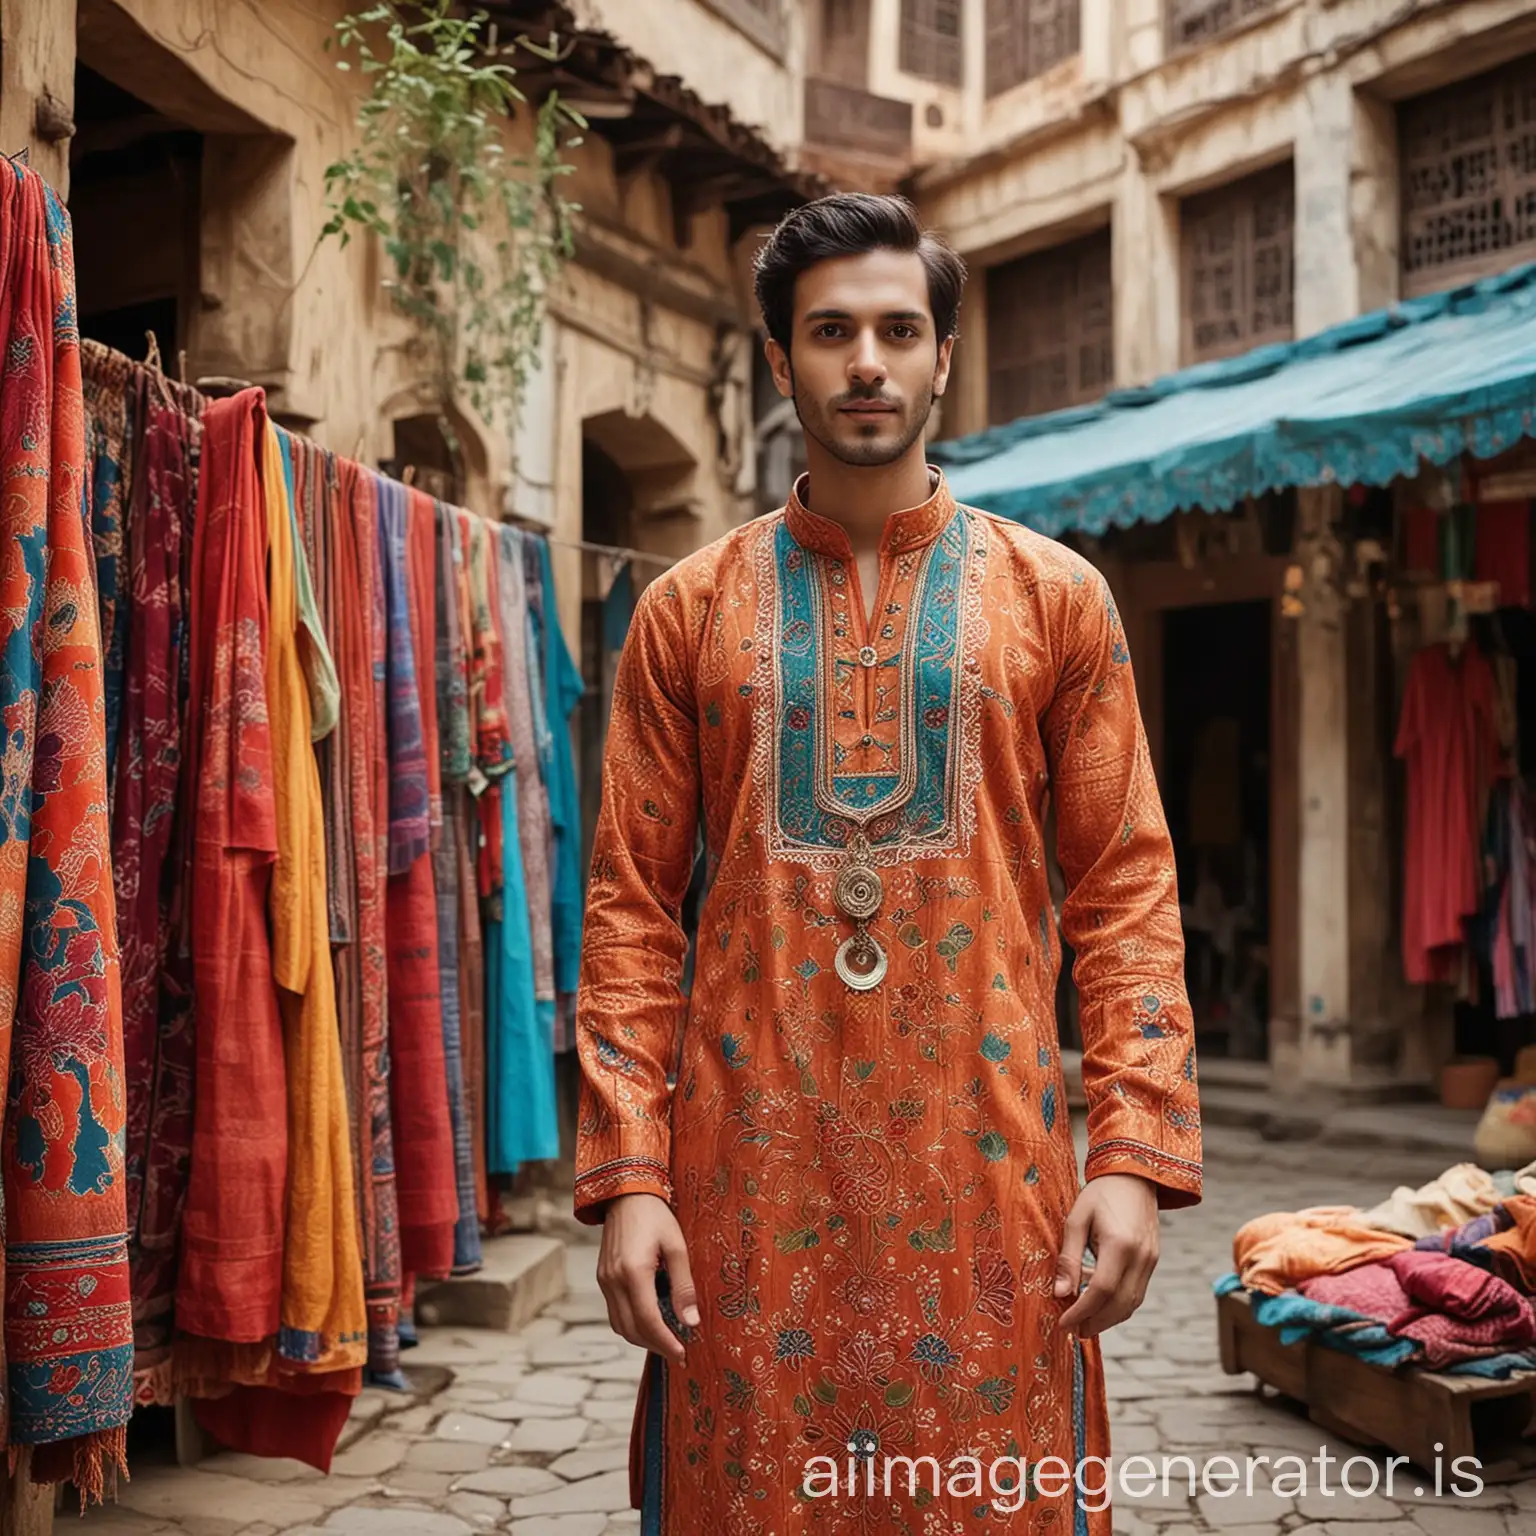 Create an image of a man wearing a traditional kurta from India, adding a touch of cultural flair to his outfit. The kurta is beautifully crafted with intricate patterns and vibrant colors, showcasing the rich textile heritage of India. The man is standing in a picturesque outdoor setting, perhaps in a bustling market or near a historic monument, surrounded by elements that highlight the cultural context, such as colorful fabrics, traditional jewelry, and local architecture. The overall scene exudes a sense of cultural appreciation and global style.